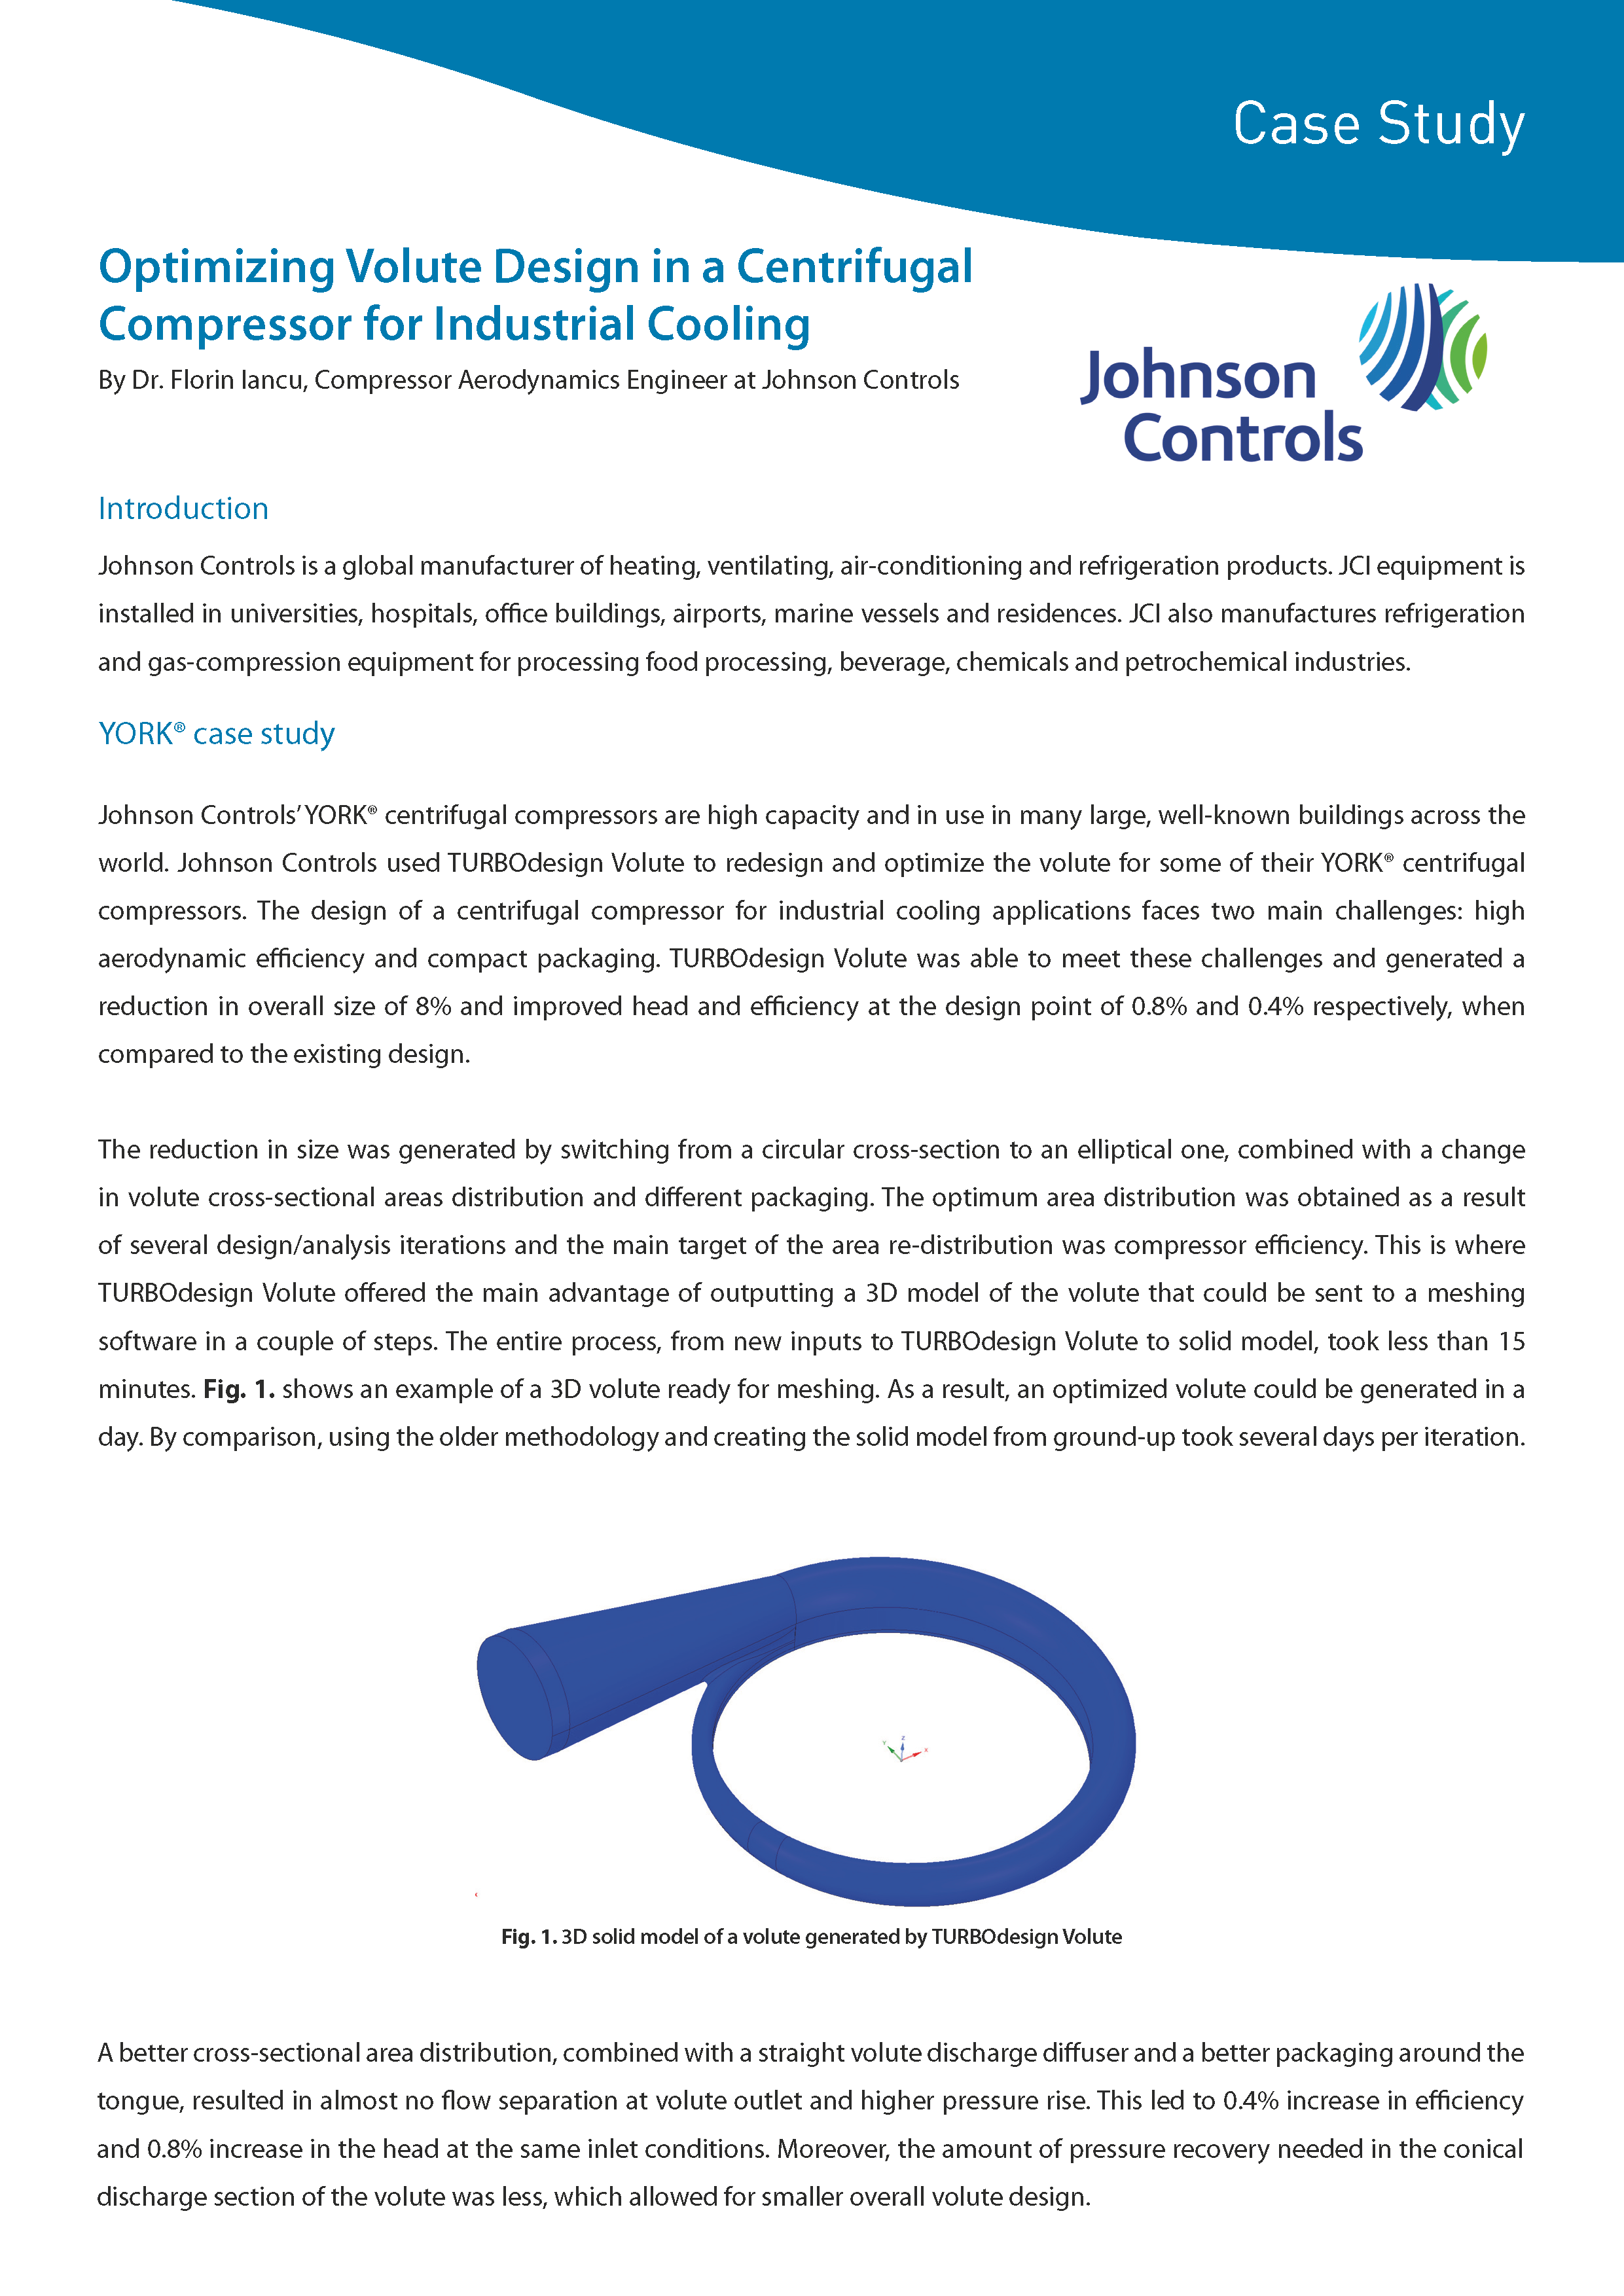 ADT Case Study - Johnson Controls front page 